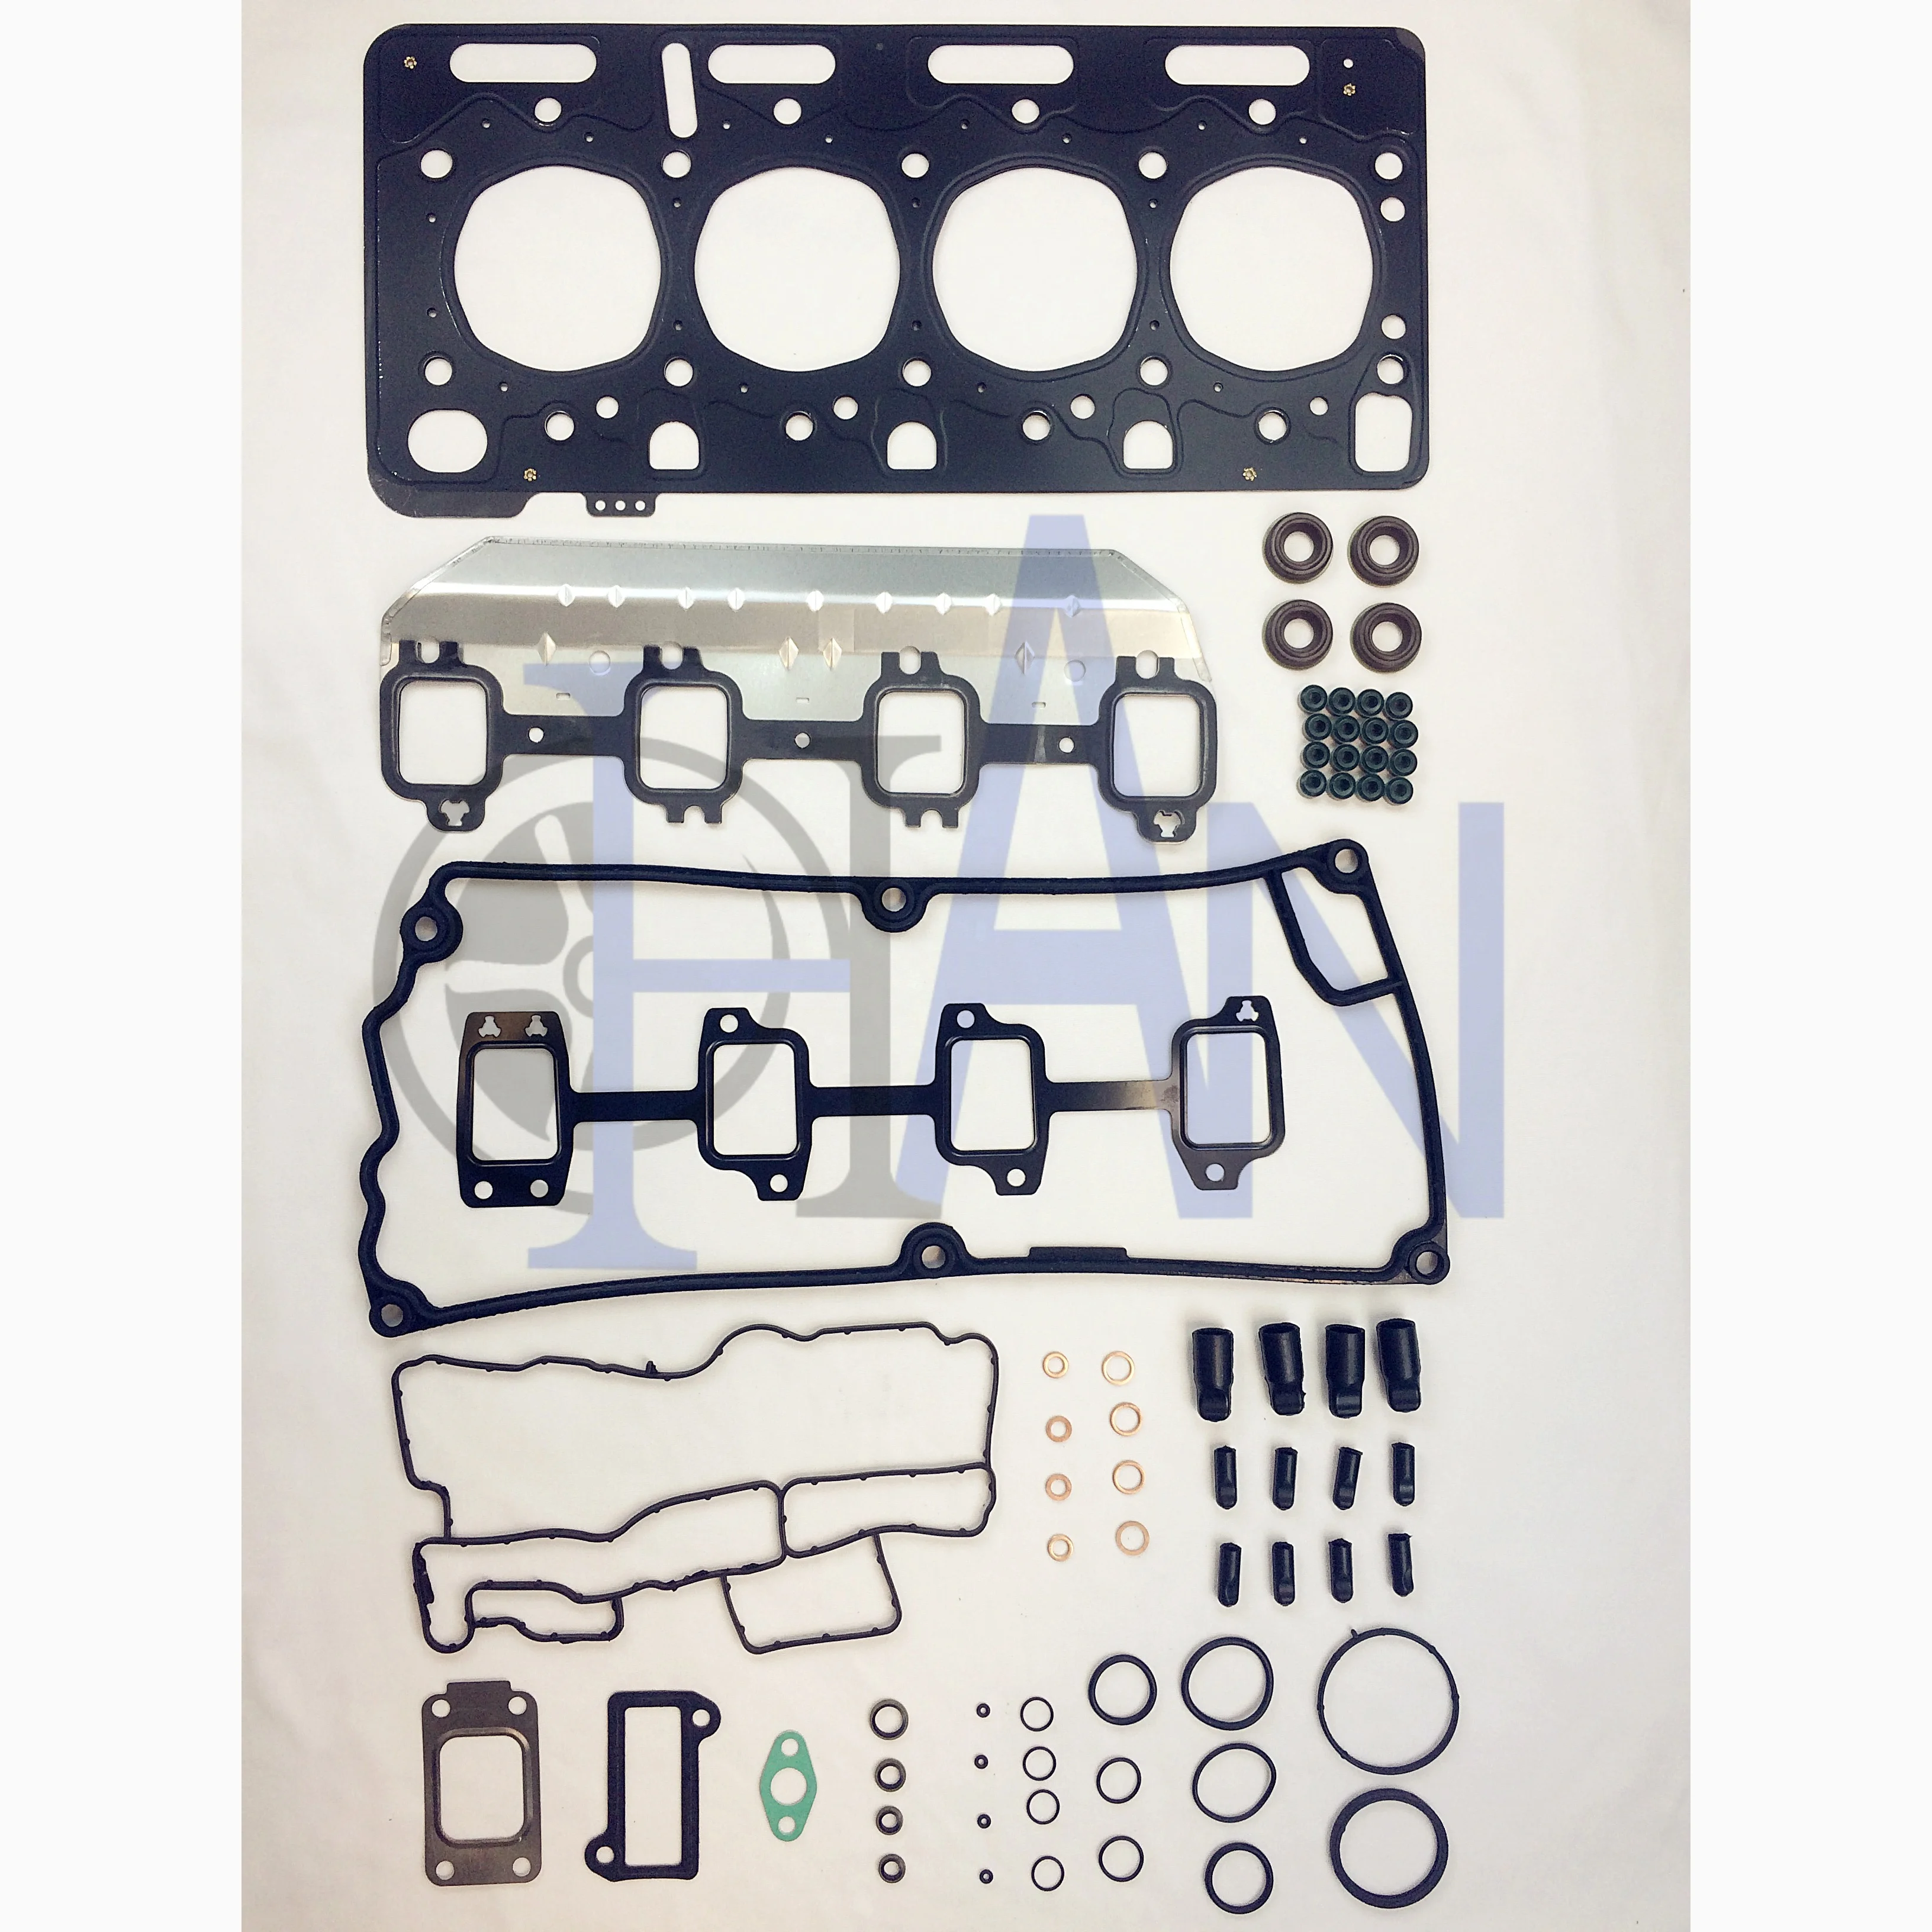 TOP GASKET KIT Fit For JCB 444 TURBO ENGINE PART NO. 320/09297 NEW 